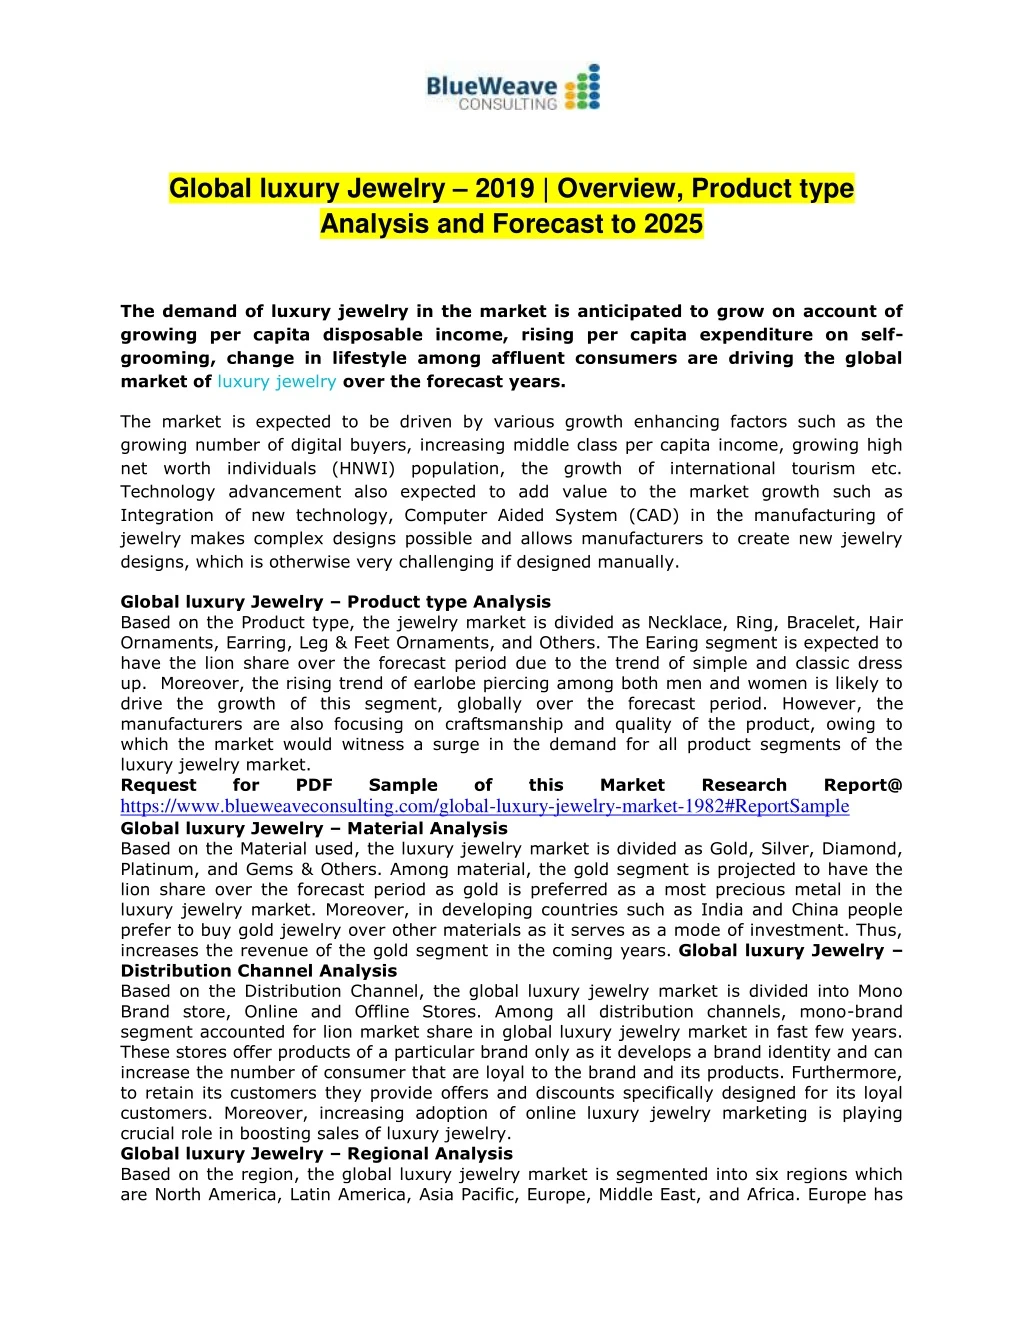 global luxury jewelry 2019 overview product type